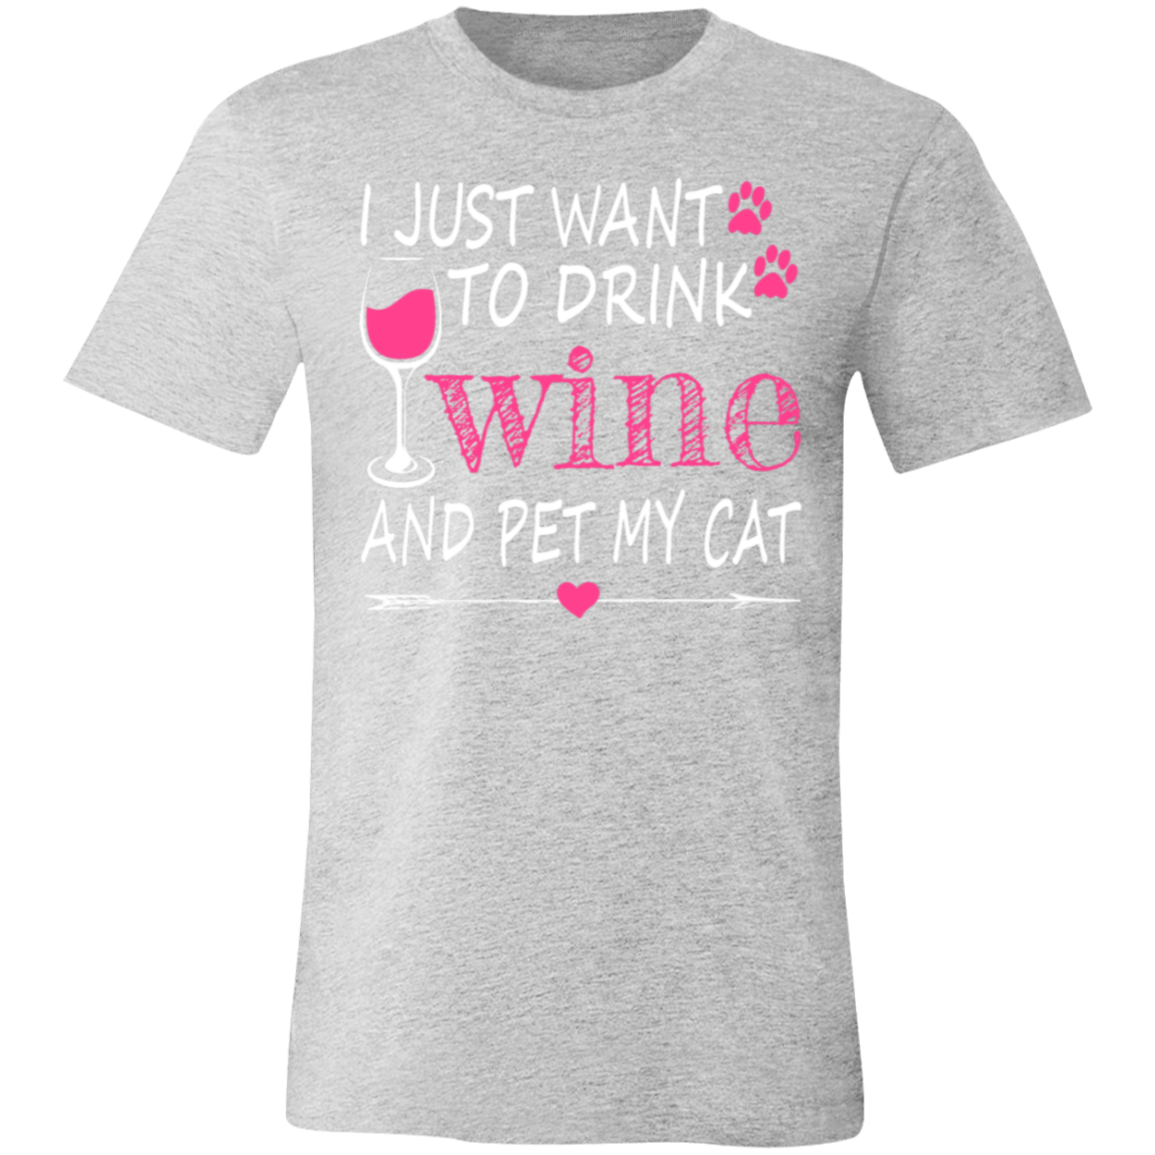 I Just Want to Drink Wine... Jersey Short-Sleeve T-Shirt